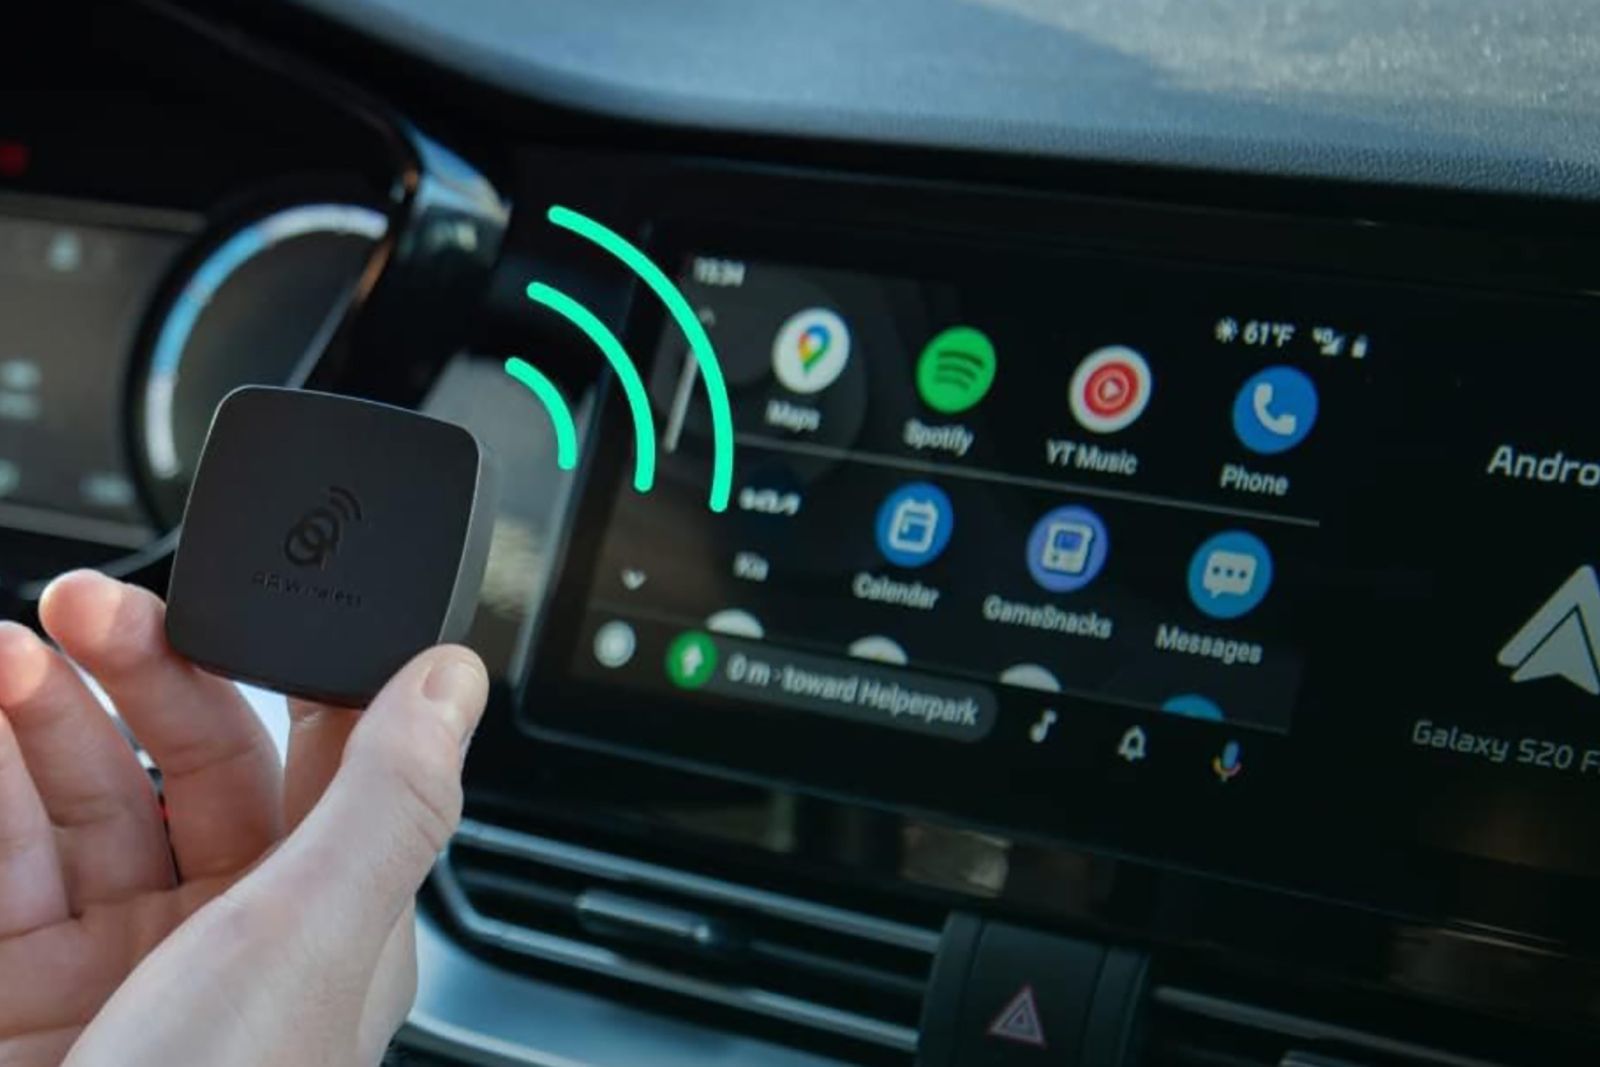 Review: AAWireless gives you wireless Android Auto in your car 